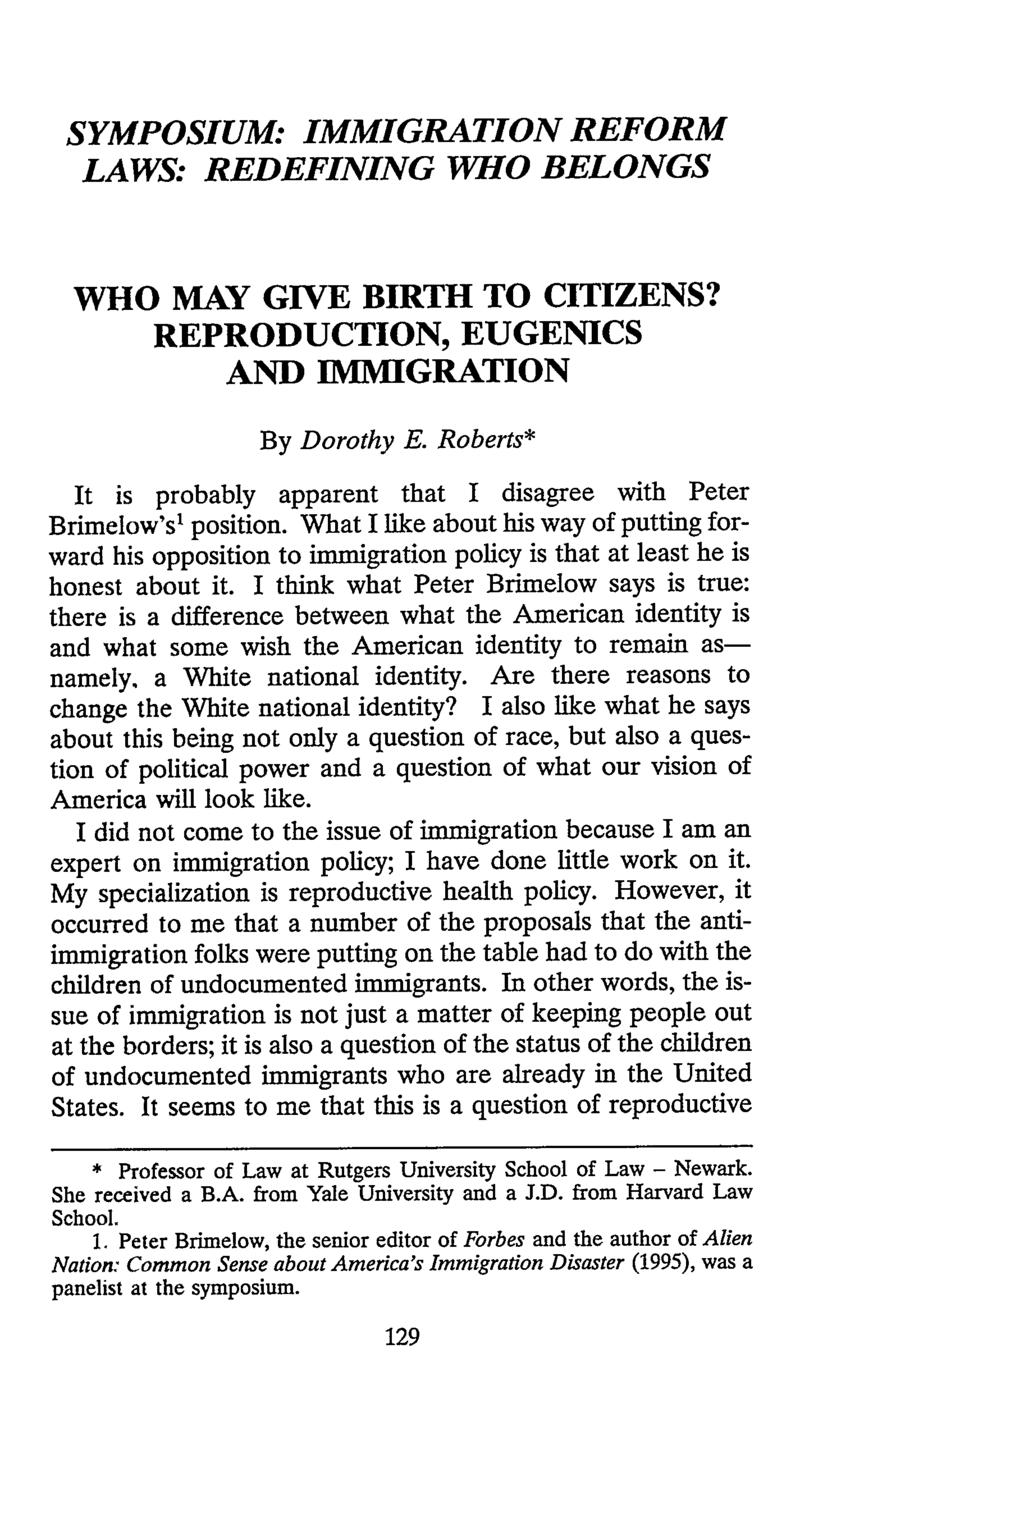 SYMPOSIUM: IMMIGRATION REFORM LAWS: REDEFINING WHO BELONGS WHO MAY GIVE BIRTH TO CITIZENS? REPRODUCTION, EUGENICS AND IMMIGRATION By Dorothy E.